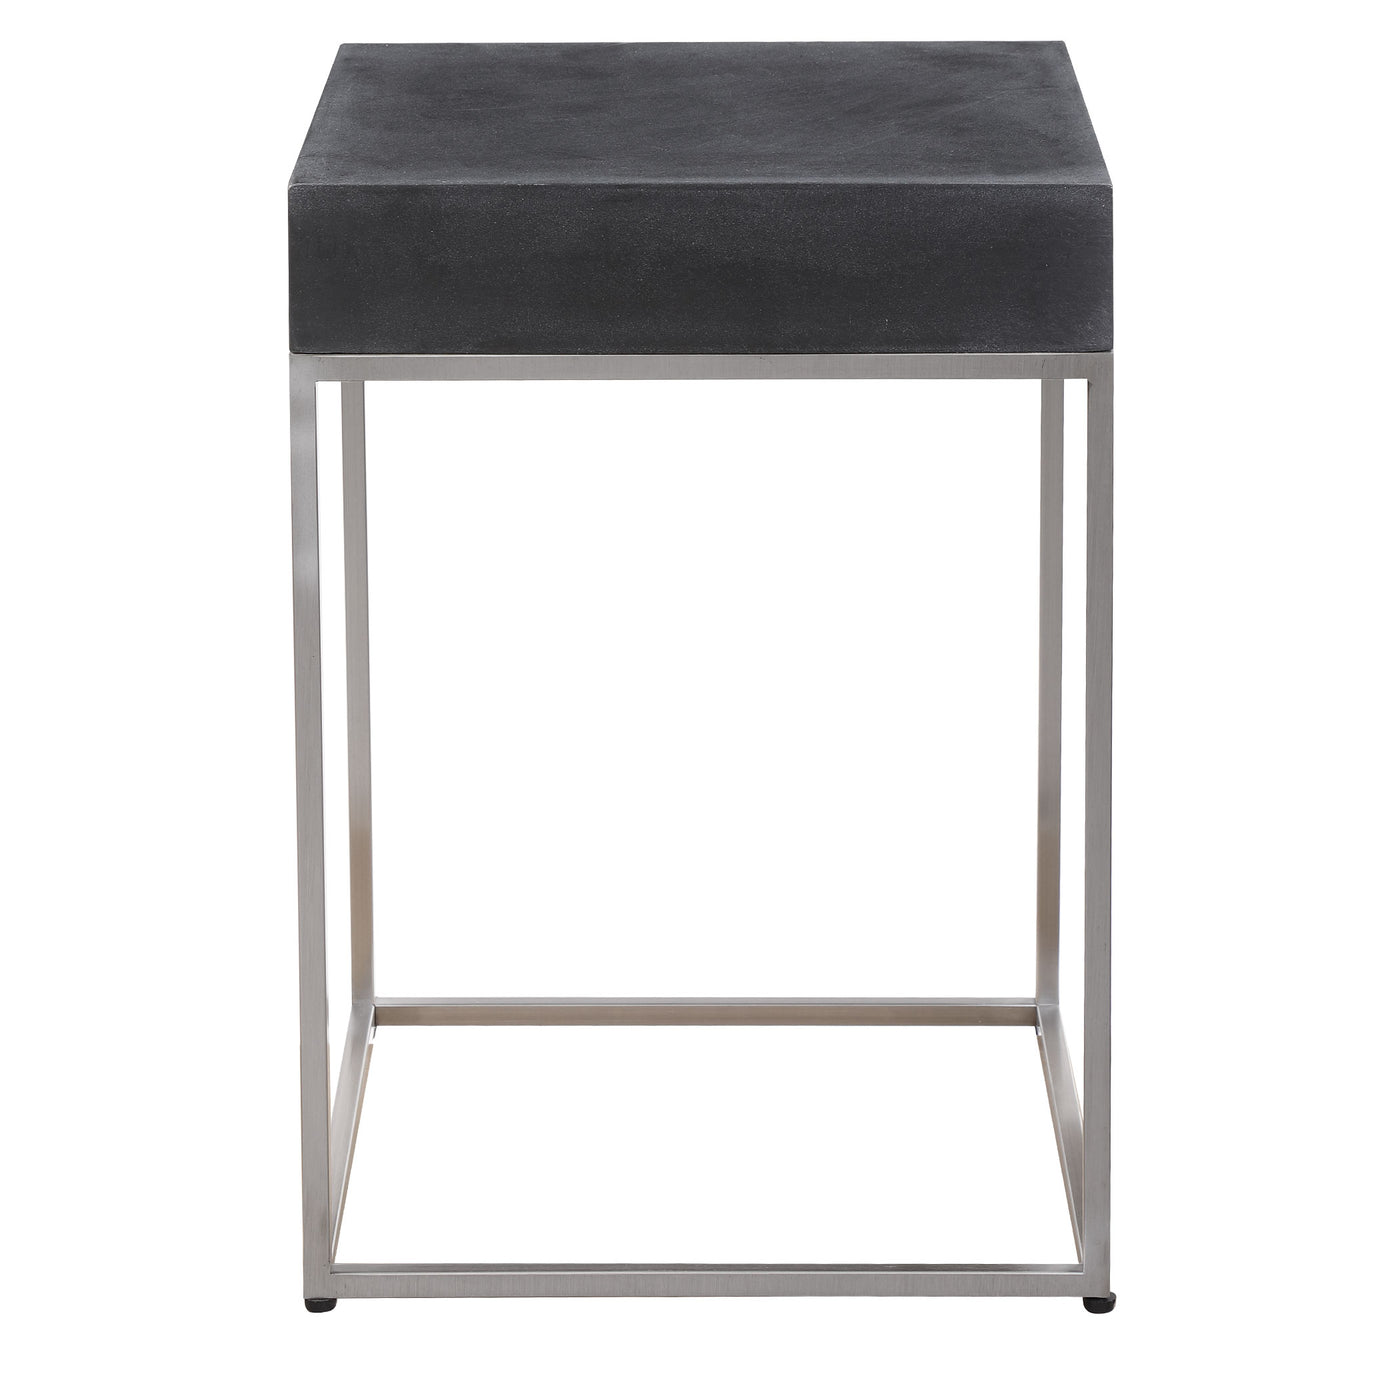 Sleek And Contemporary, This Accent Table Features A Black Concrete Look Atop A Brushed Nickel Stainless Steel Base.